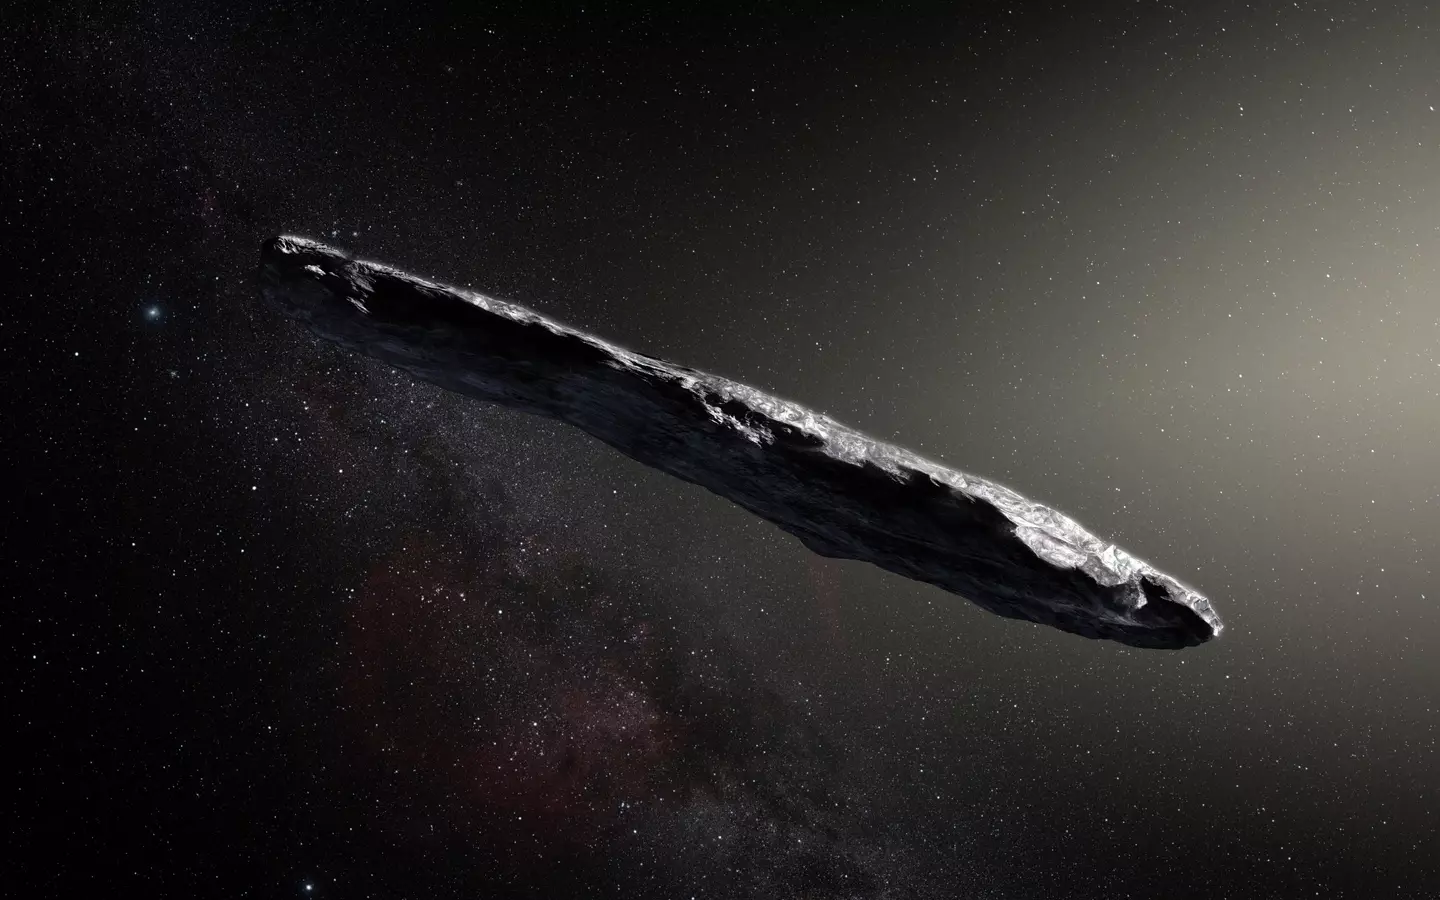 Oumuamua has been a mystery for years now.